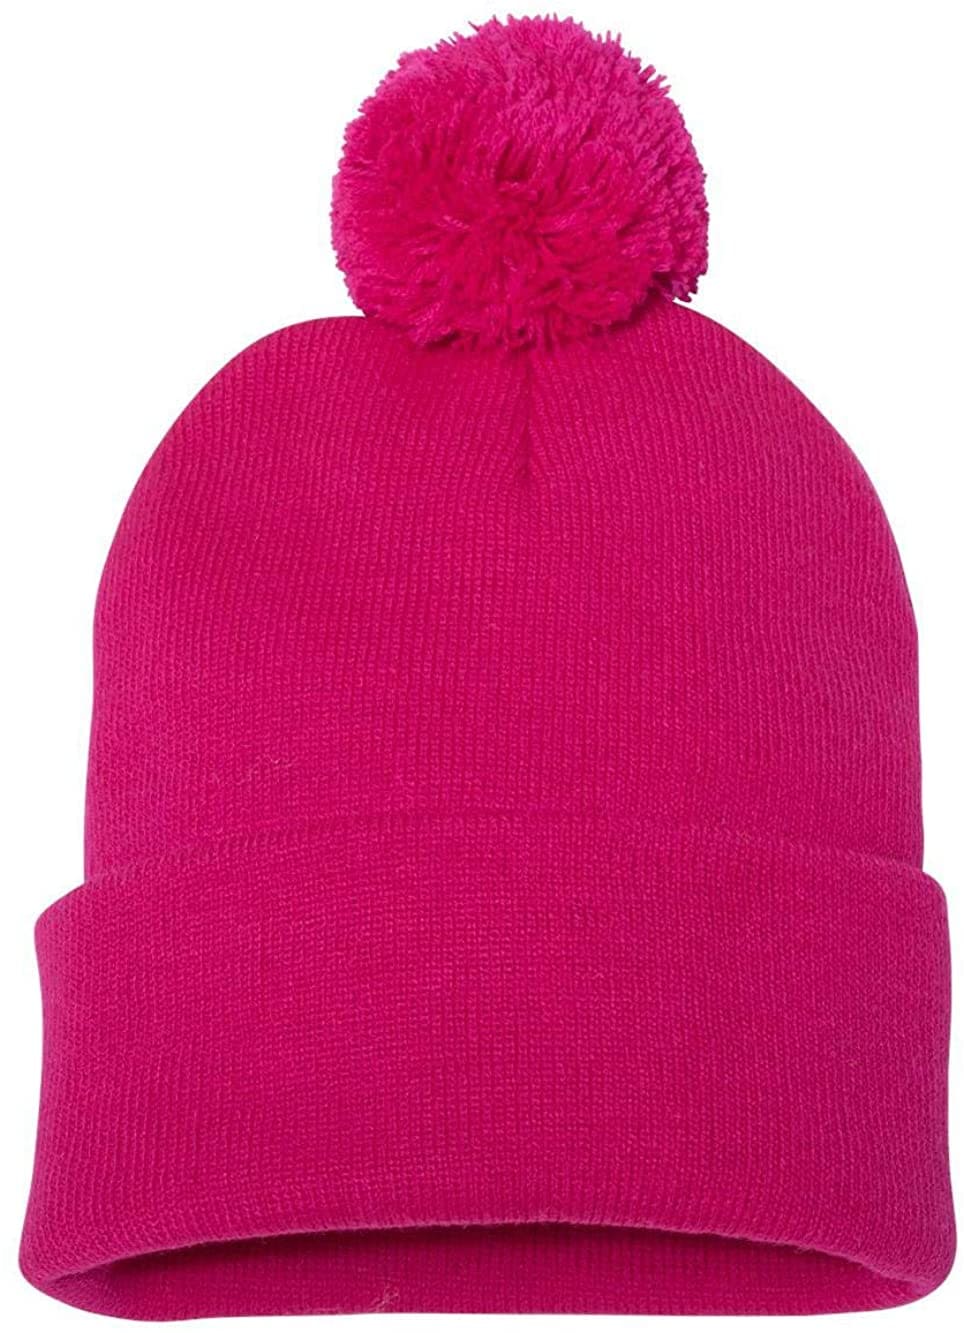 TOPONE ACCESSORIES LIMITED Custom Acrylic Winter Cap with Cuff and Pom Knitted Beanie Hat Topone Accessories Ltd. 